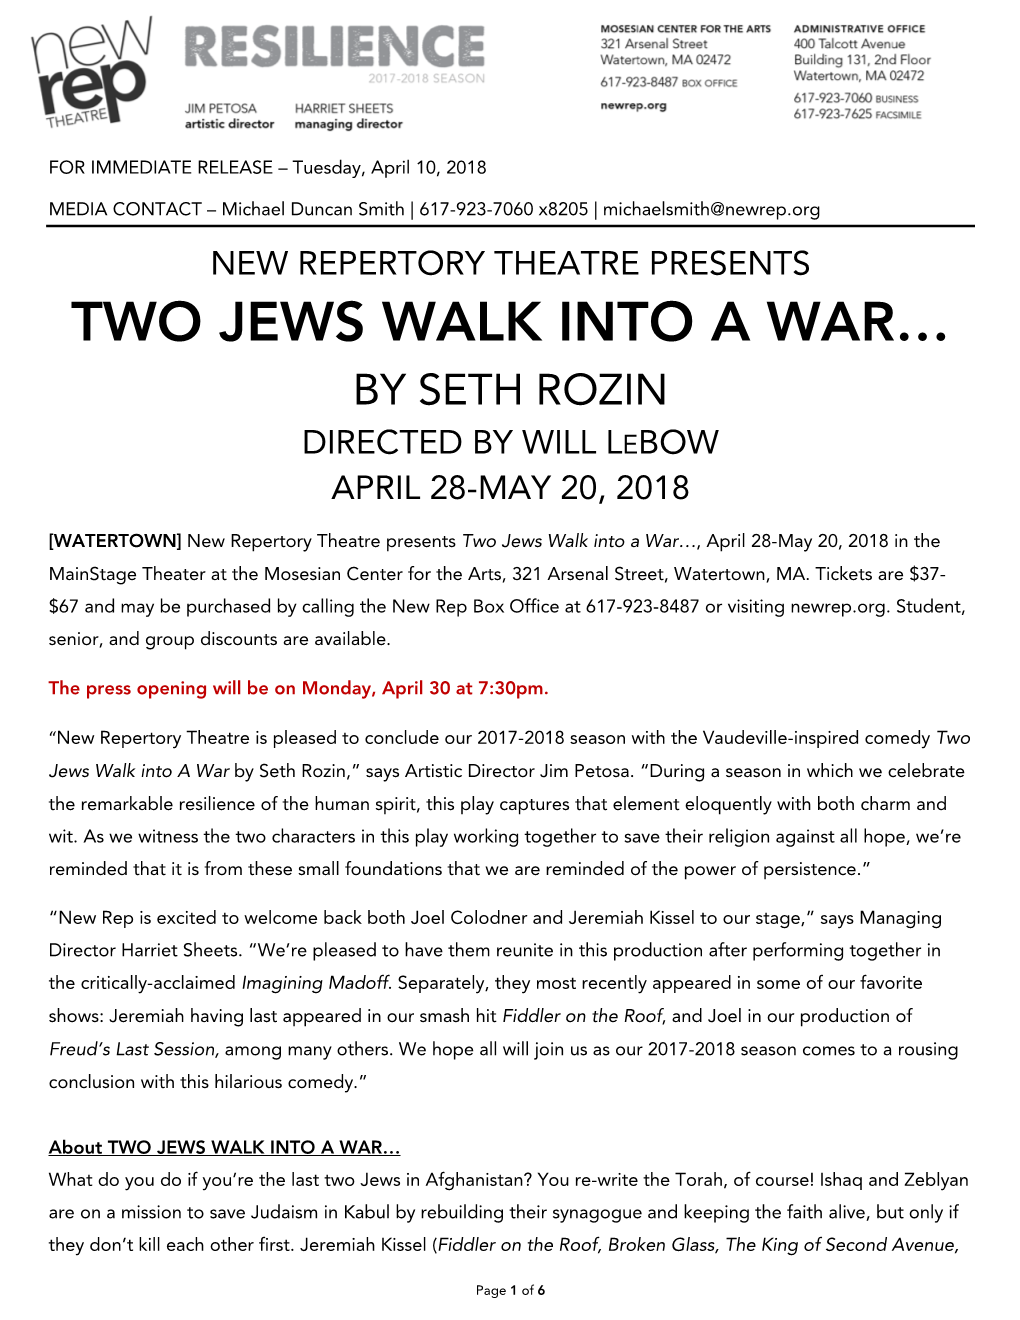 Two Jews Walk Into a War… by Seth Rozin Directed by Will Lebow April 28-May 20, 2018